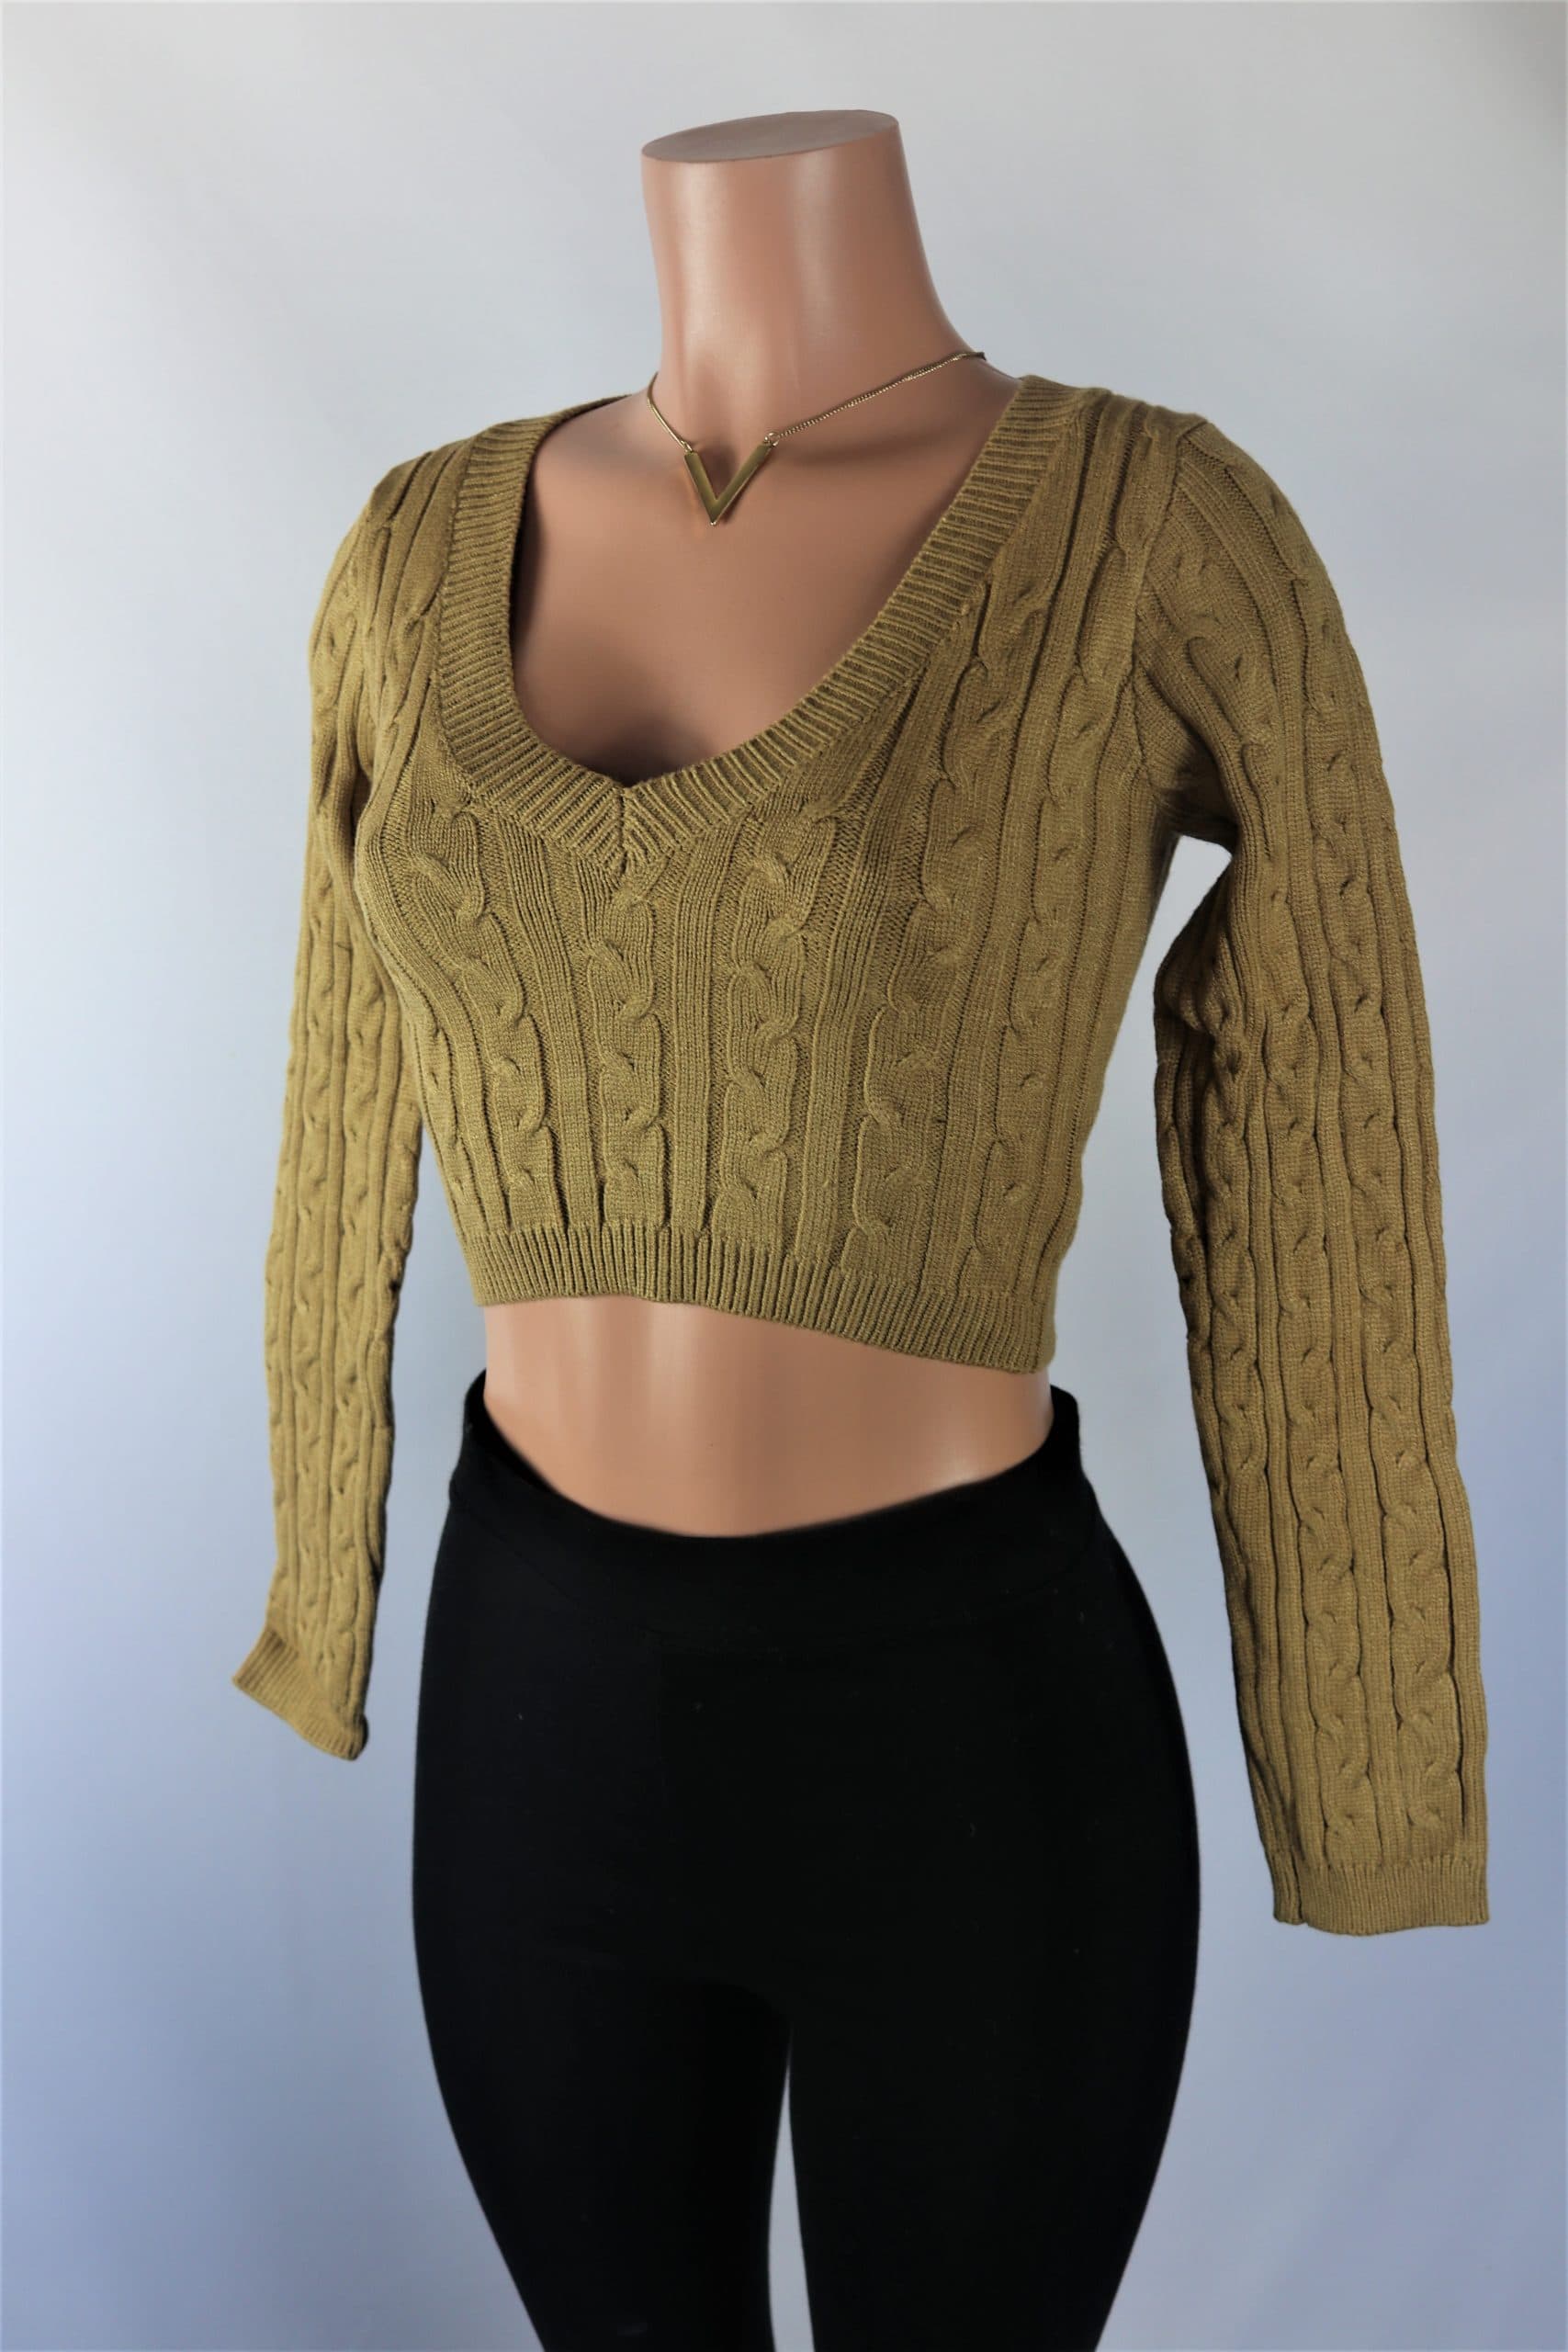 Taupe Crop Top - Taupe ribbed textured long sleeve crop top sweater.